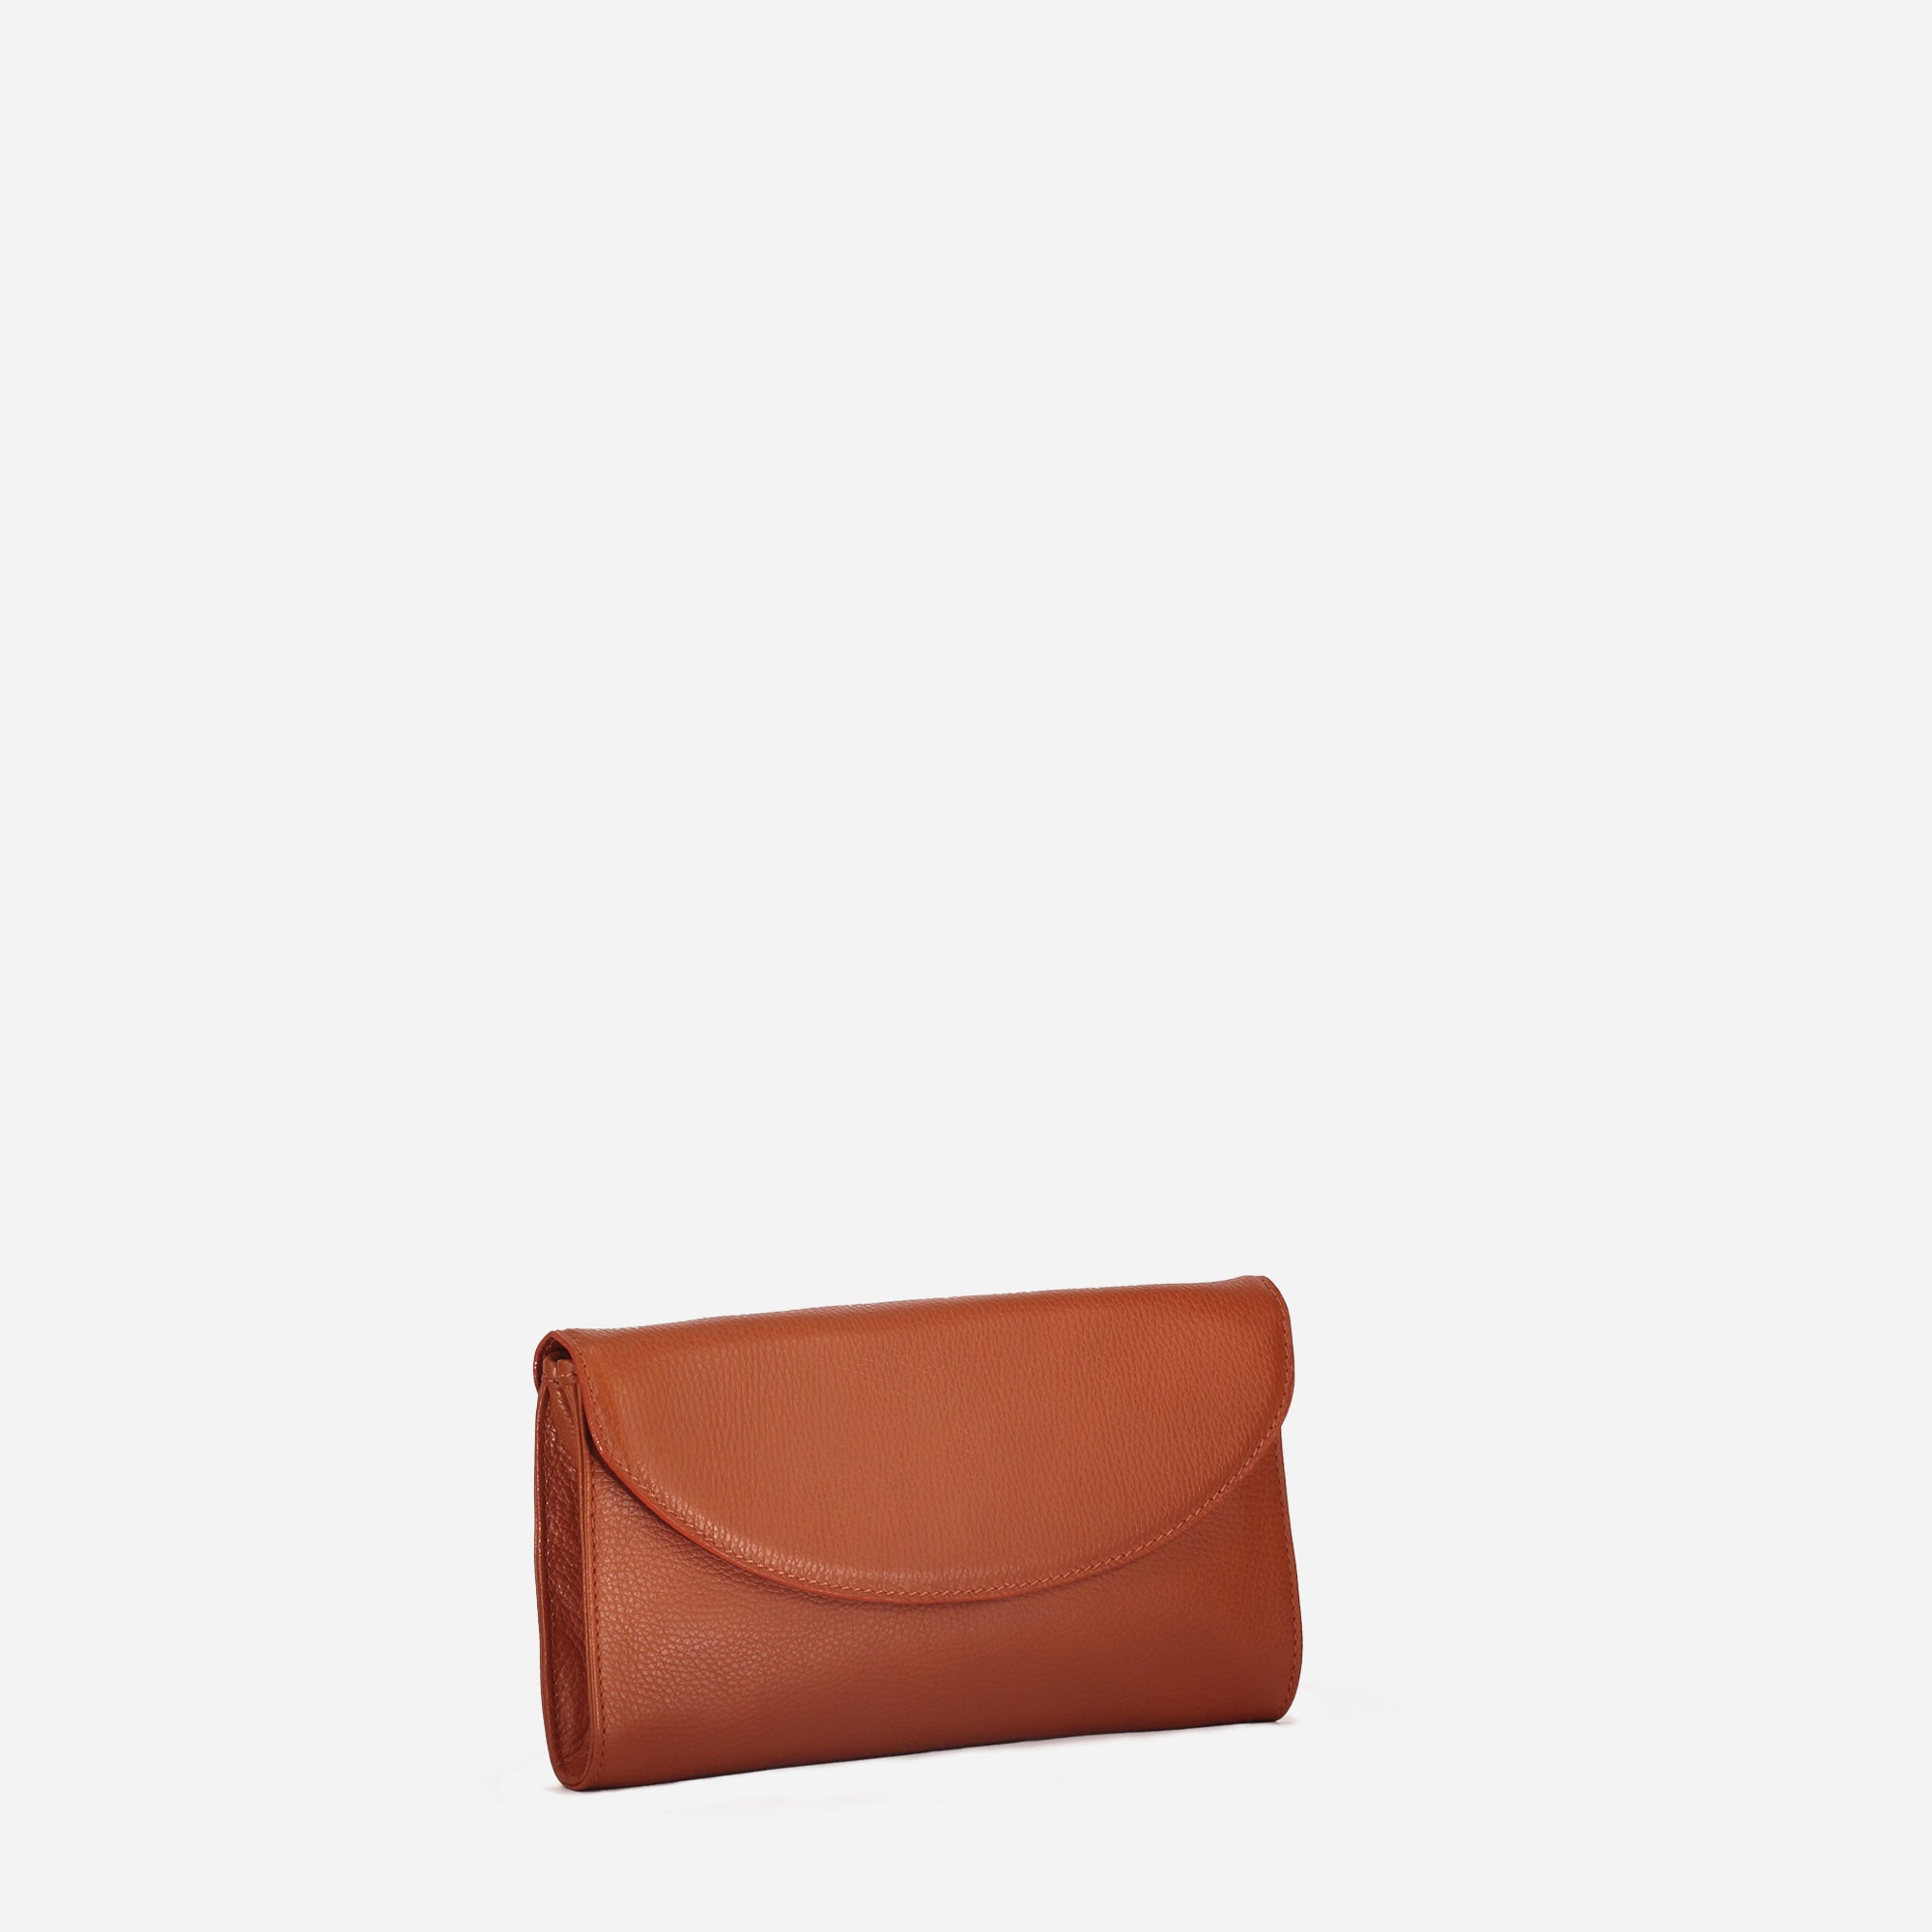 593 – CLUTCH<br>Embossed calf skin leather